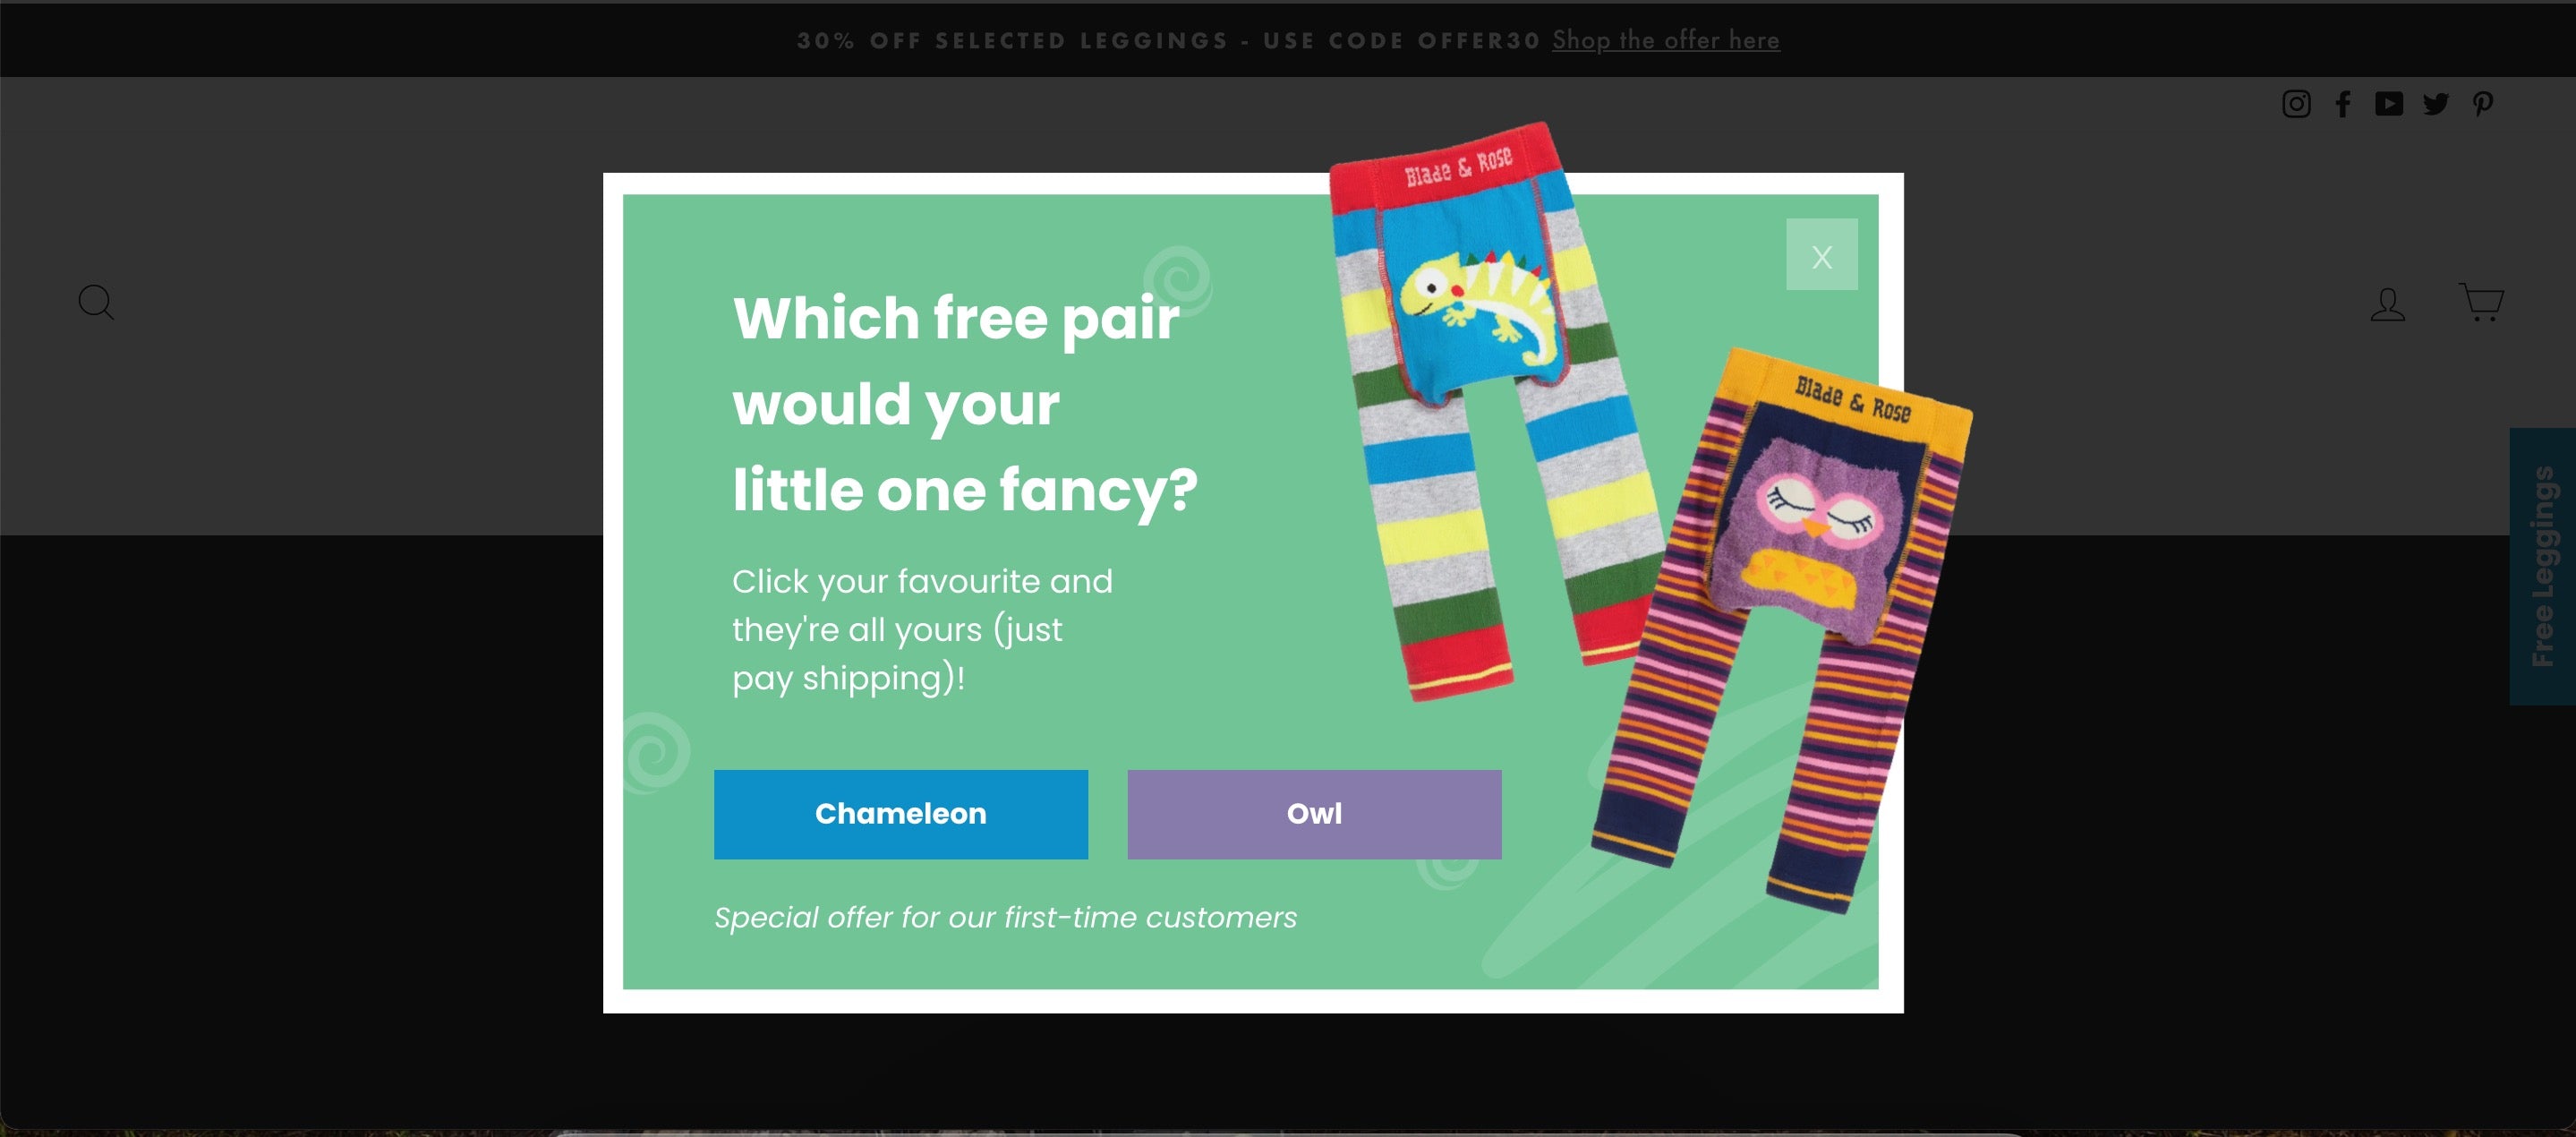 Pop-up that asks customers which pair of free leggings they want. Then it shows two styles and customers can click which one they prefer from two buttons.